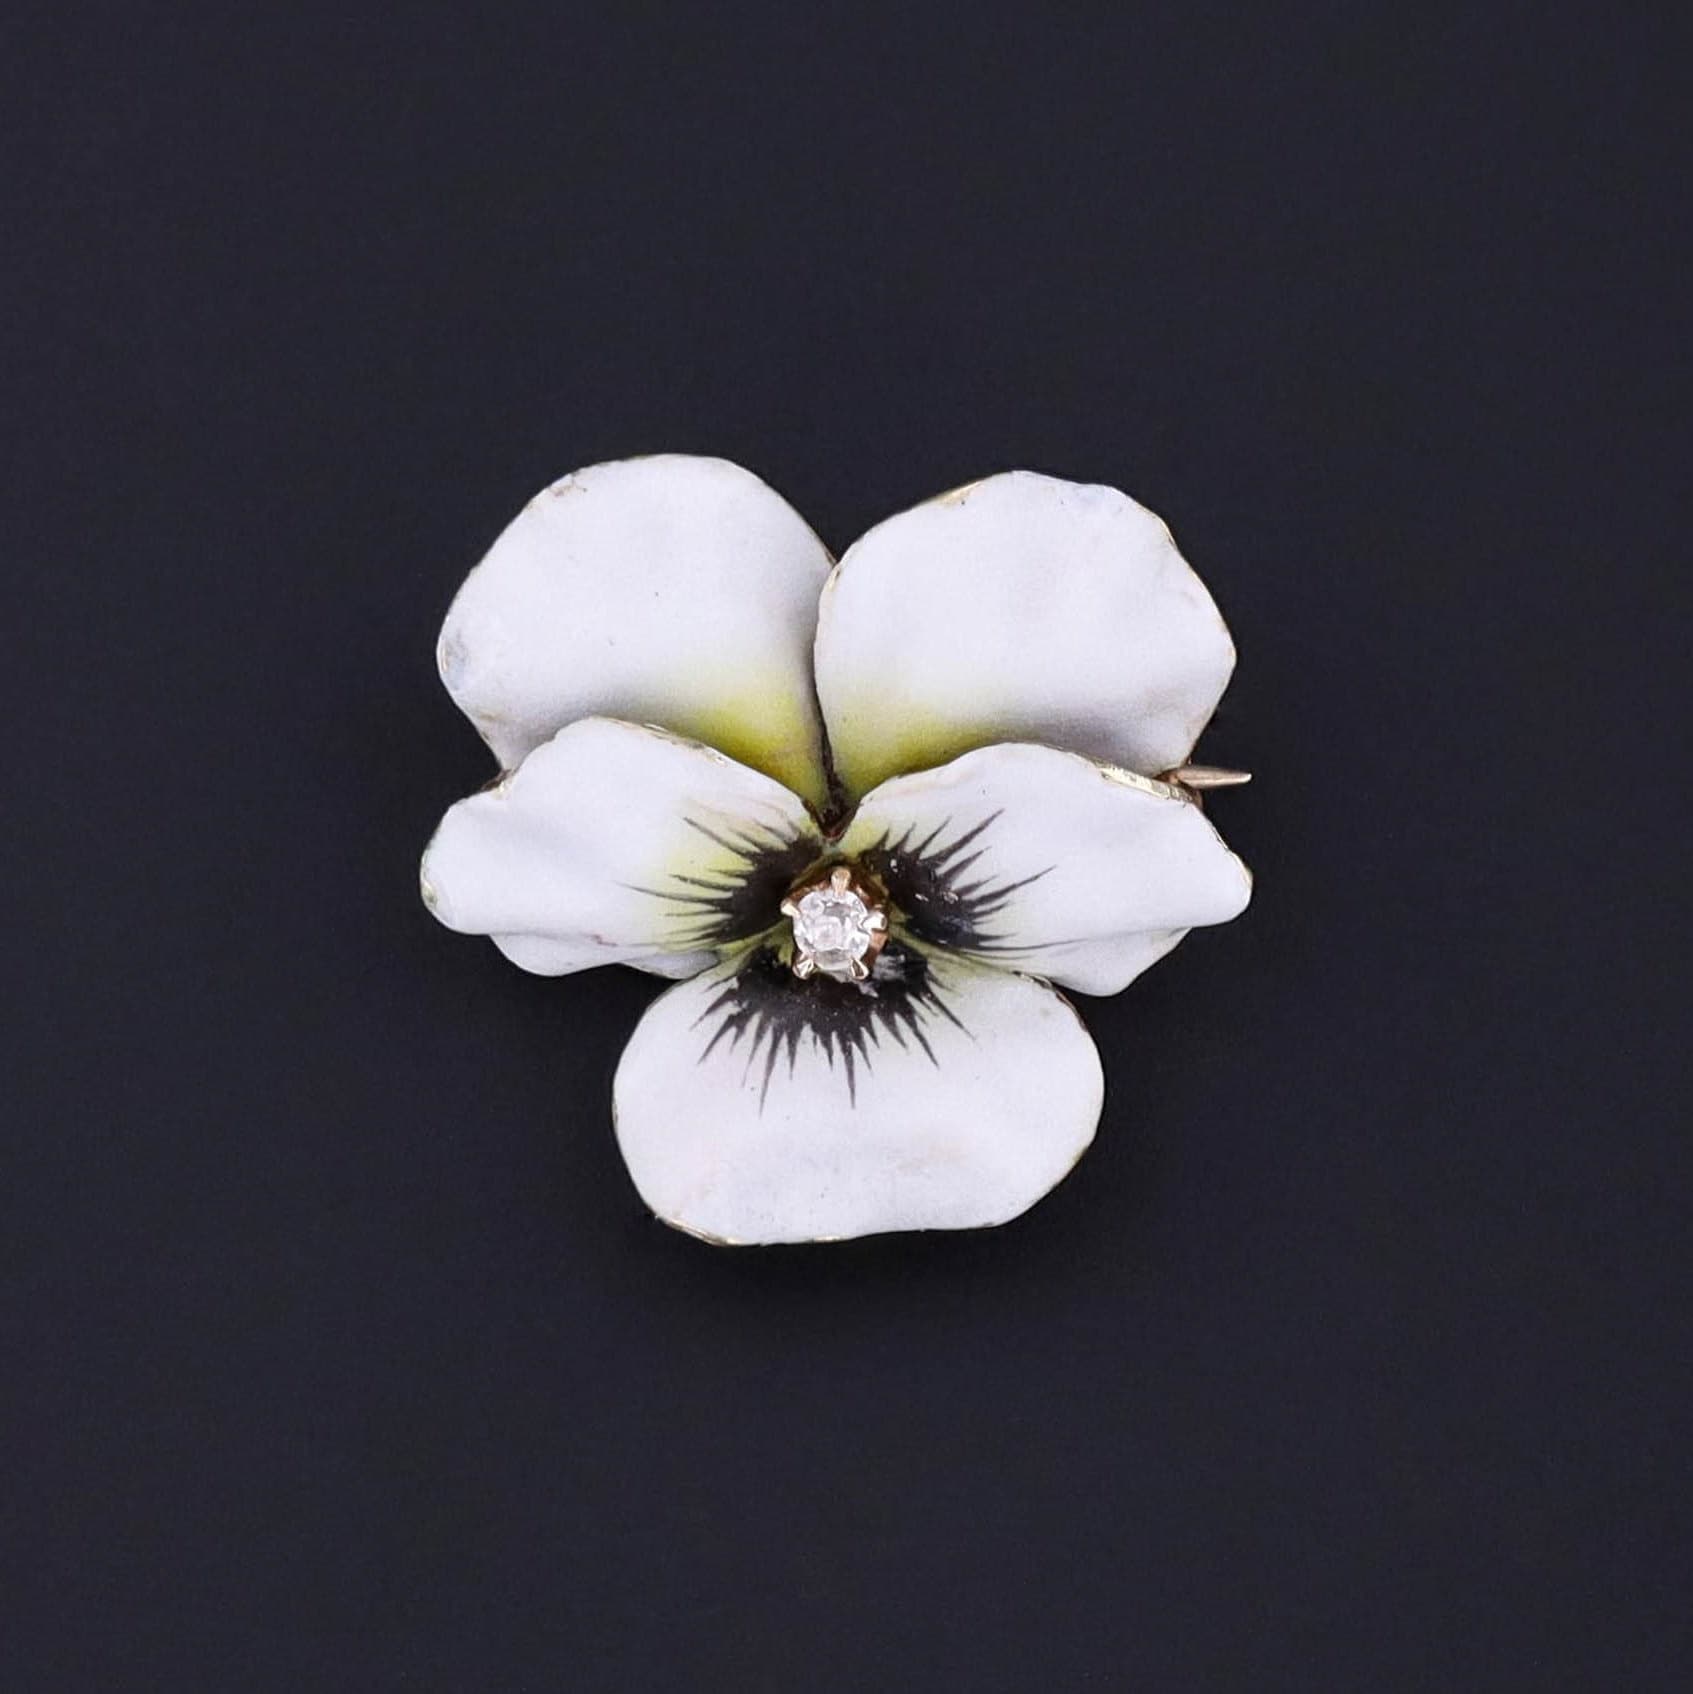 Antique White Enamel Pansy Brooch of 14k Gold